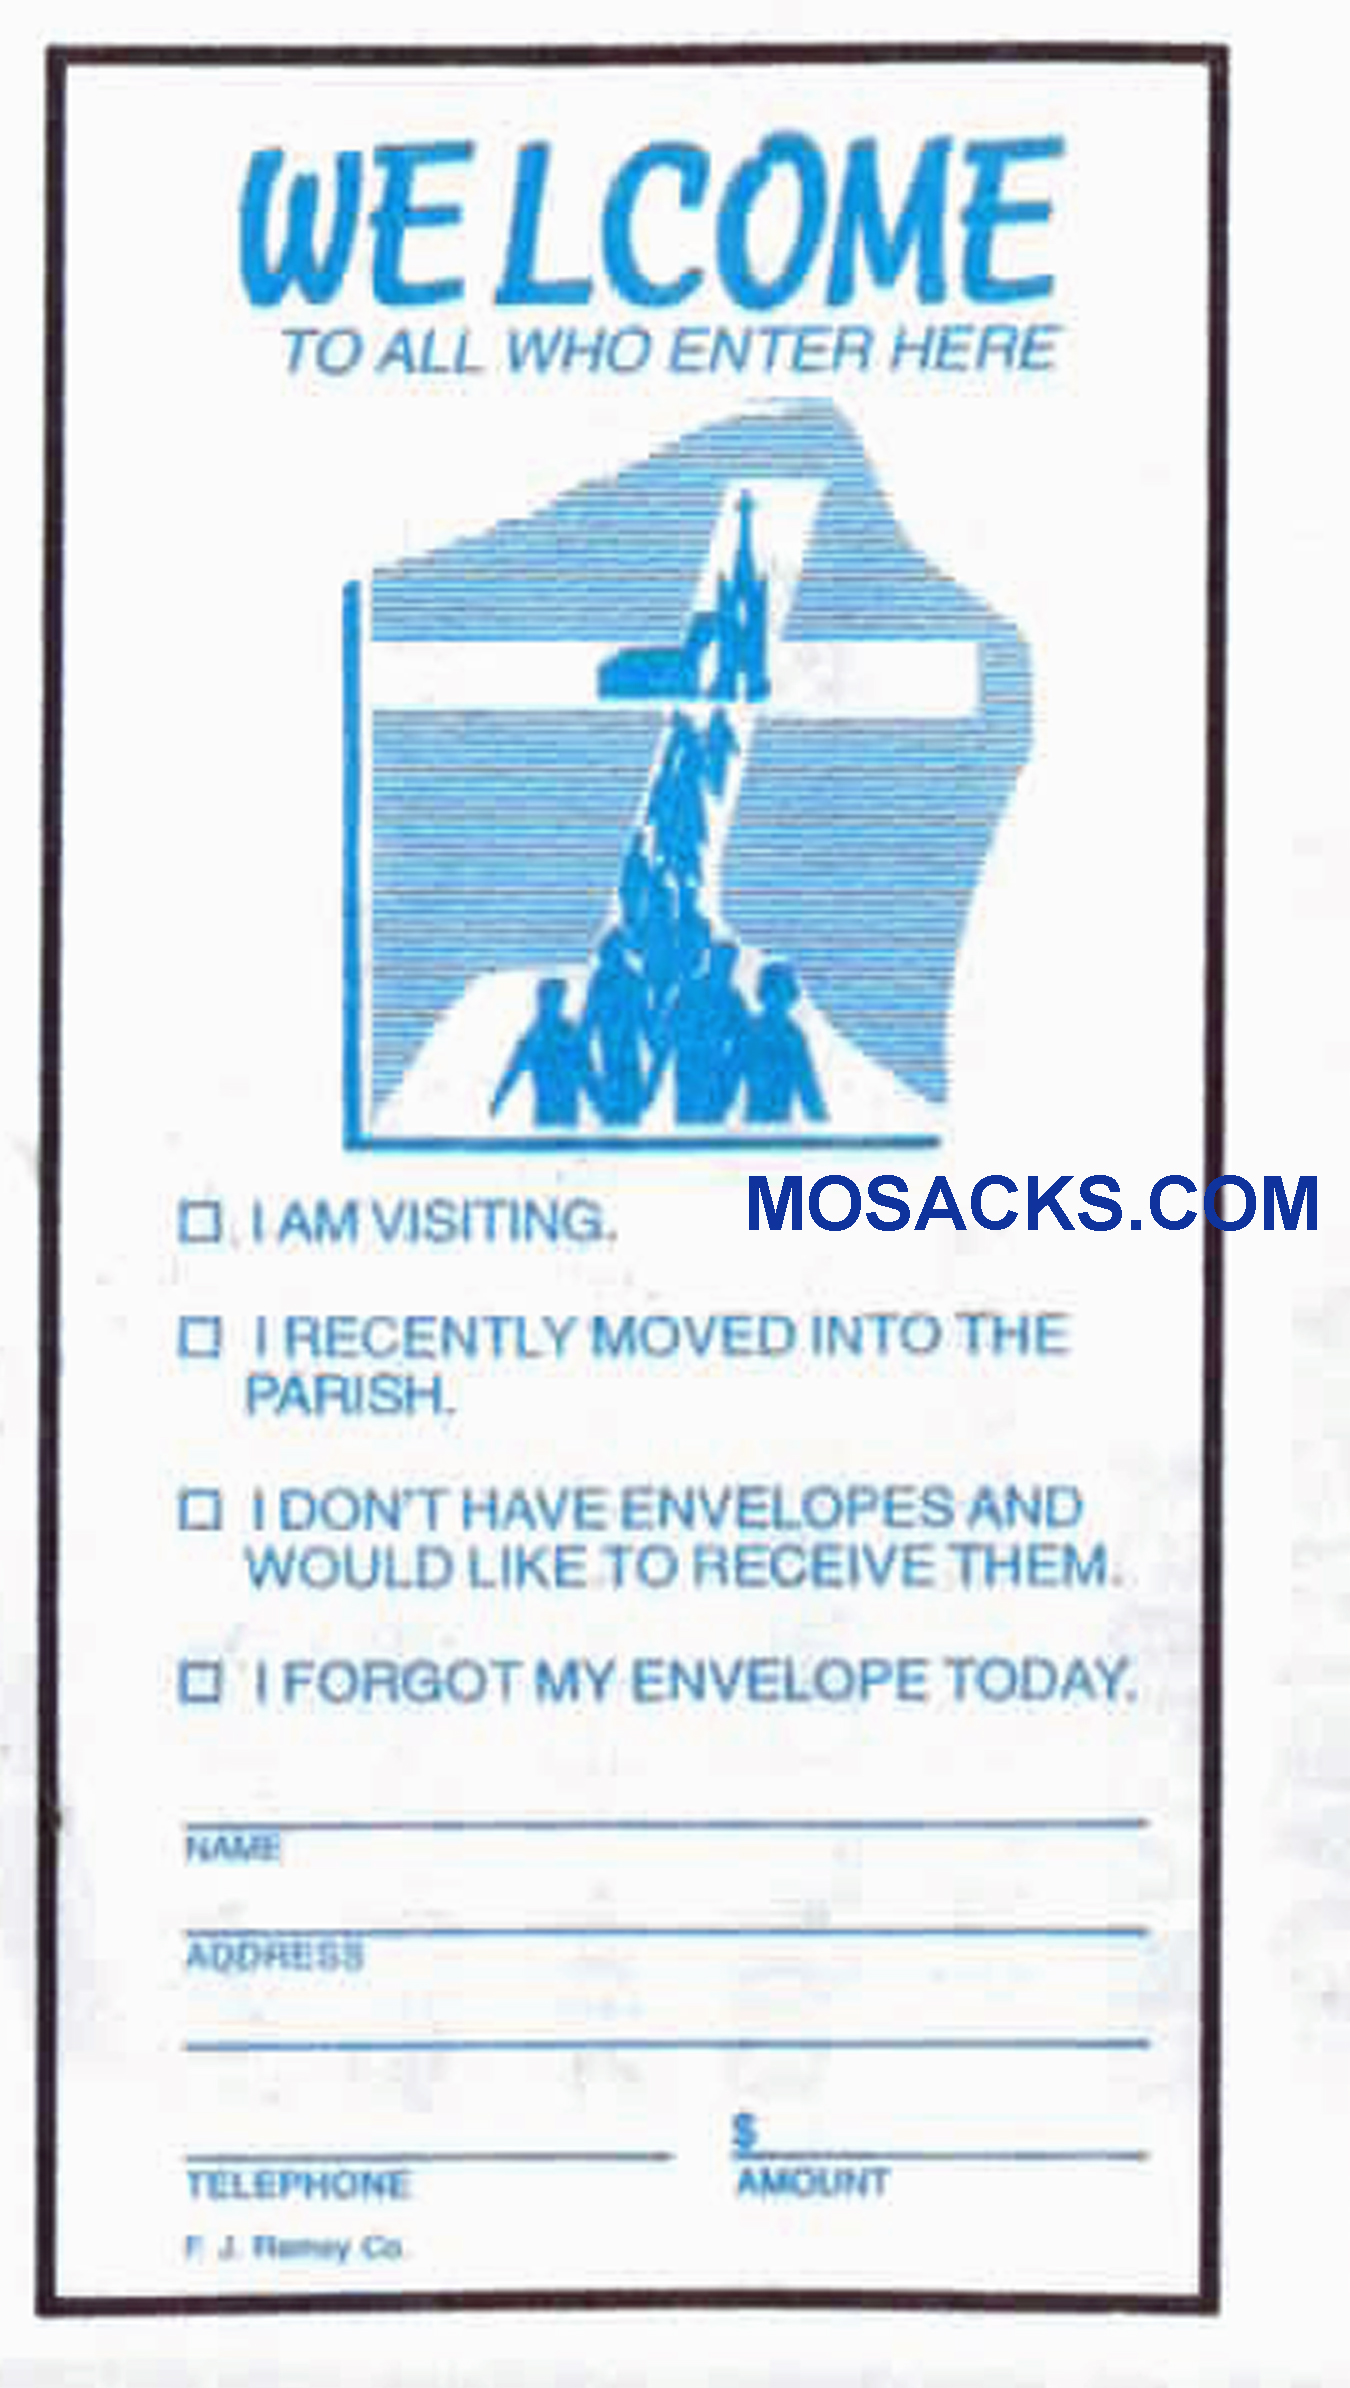 Welcome To All Who Enter Here - Church Offering Envelope 6-1/4 x 3-1/8 #304-389